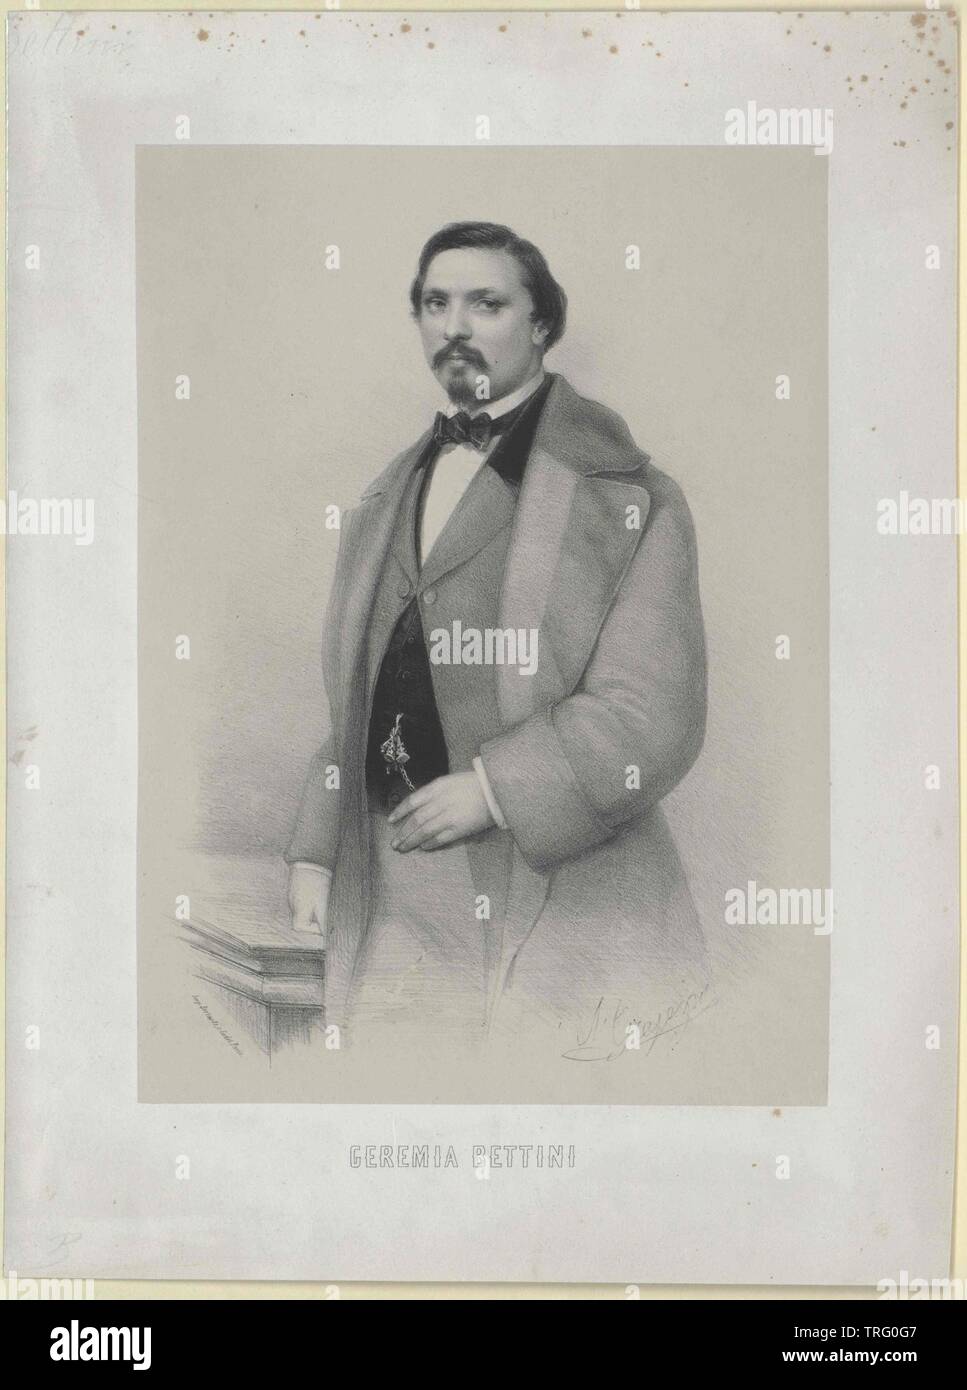 Bettini, Geremia, tenore all'Opera Viennese 1854-1859, Additional-Rights-Clearance-Info-Not-Available Foto Stock